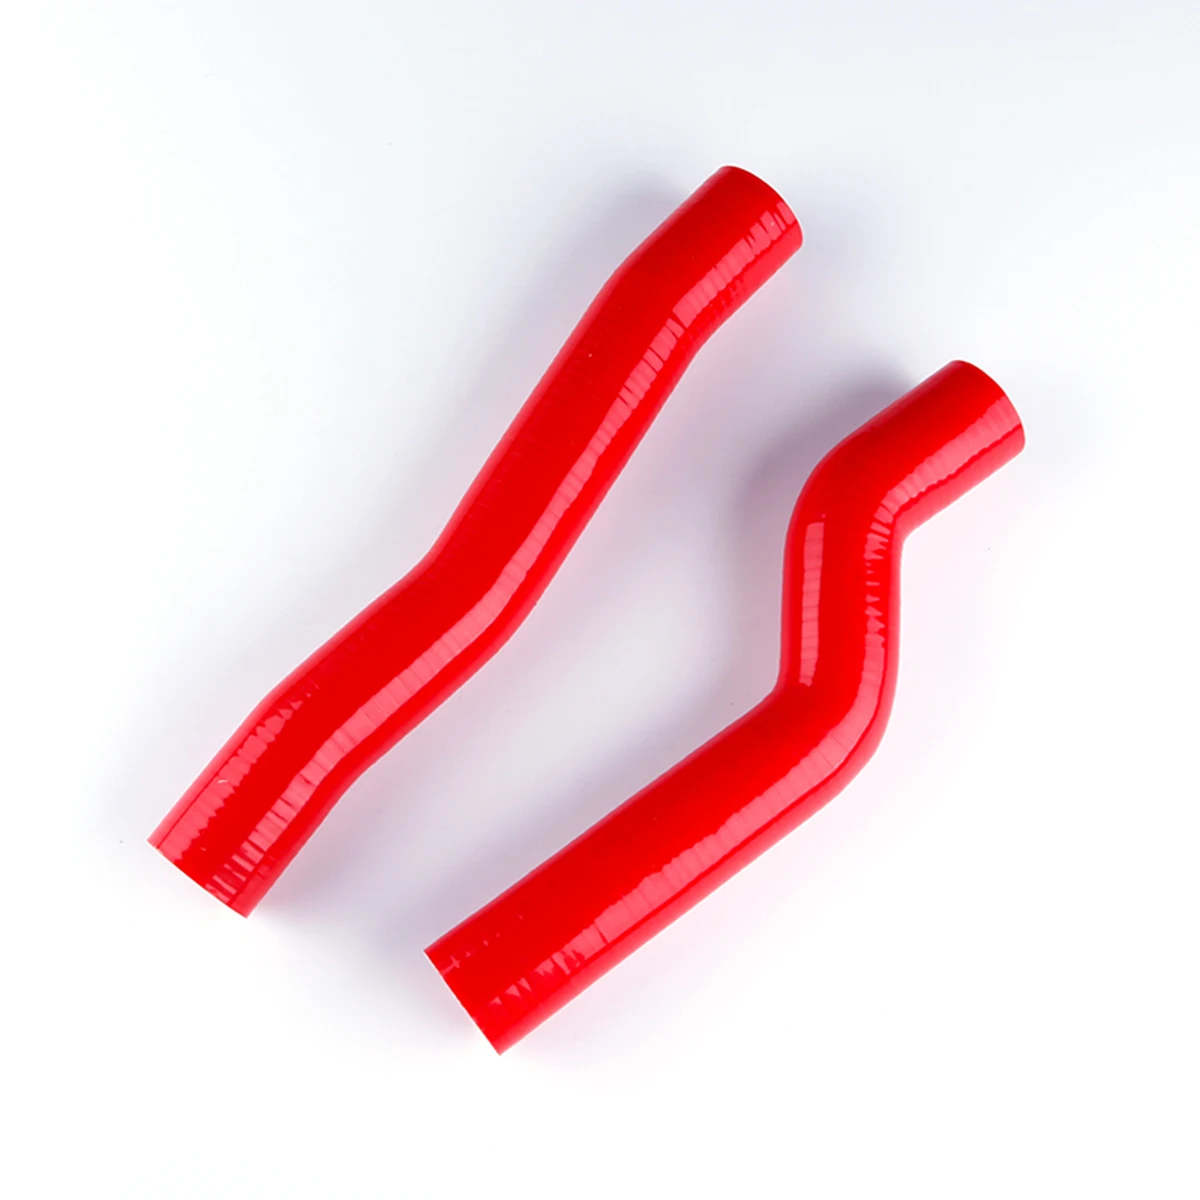 FOR Hyundai Genesis Coupe 4cyl Turbo Coolant Pipe Silicone Radiator Hose Kit 2Pcs 10 Colors